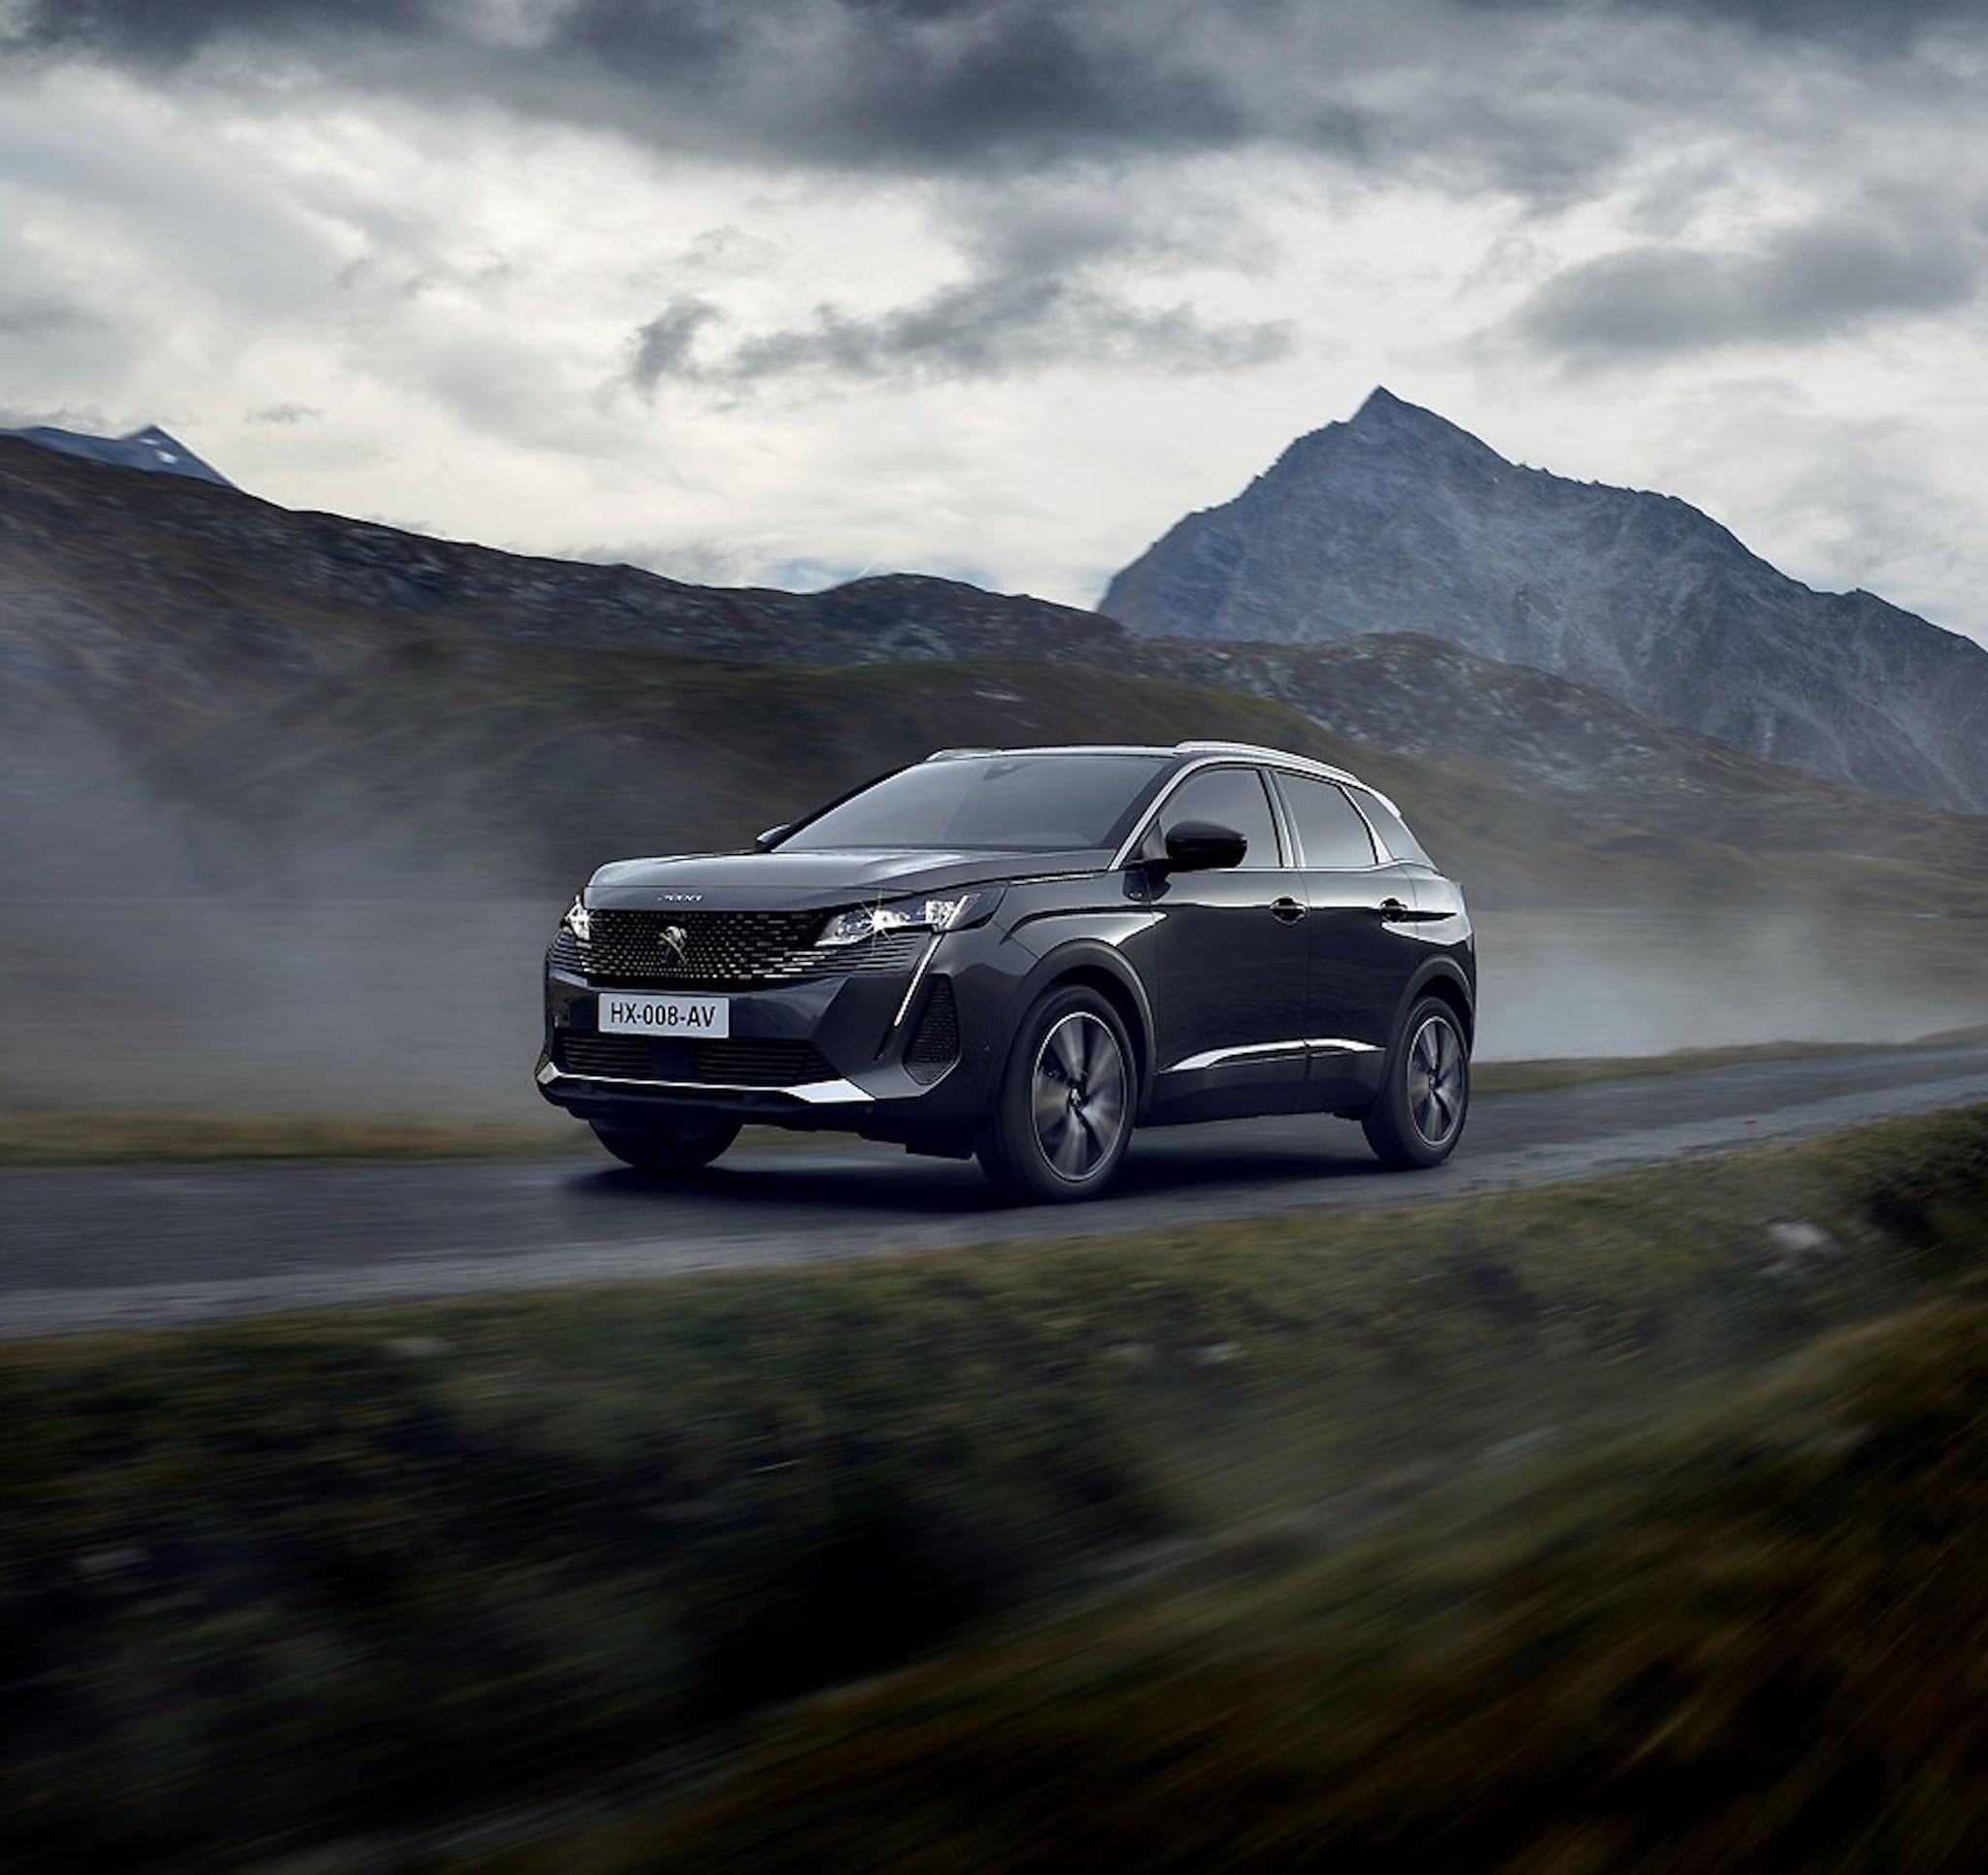 Peugeot 5008 driving a country road